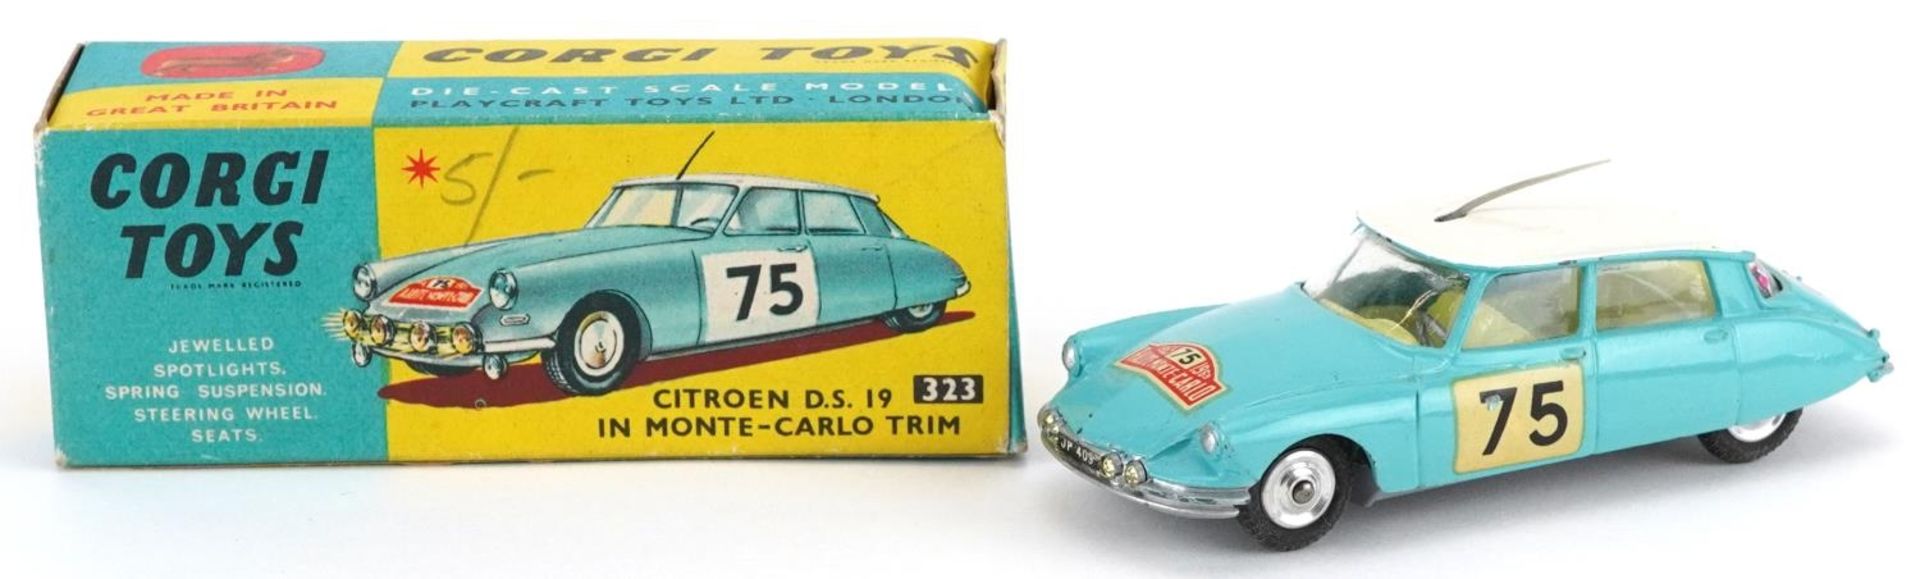 Vintage Corgi Toys Citroen DS 19 in Monte-Carlo trim with box numbered 323